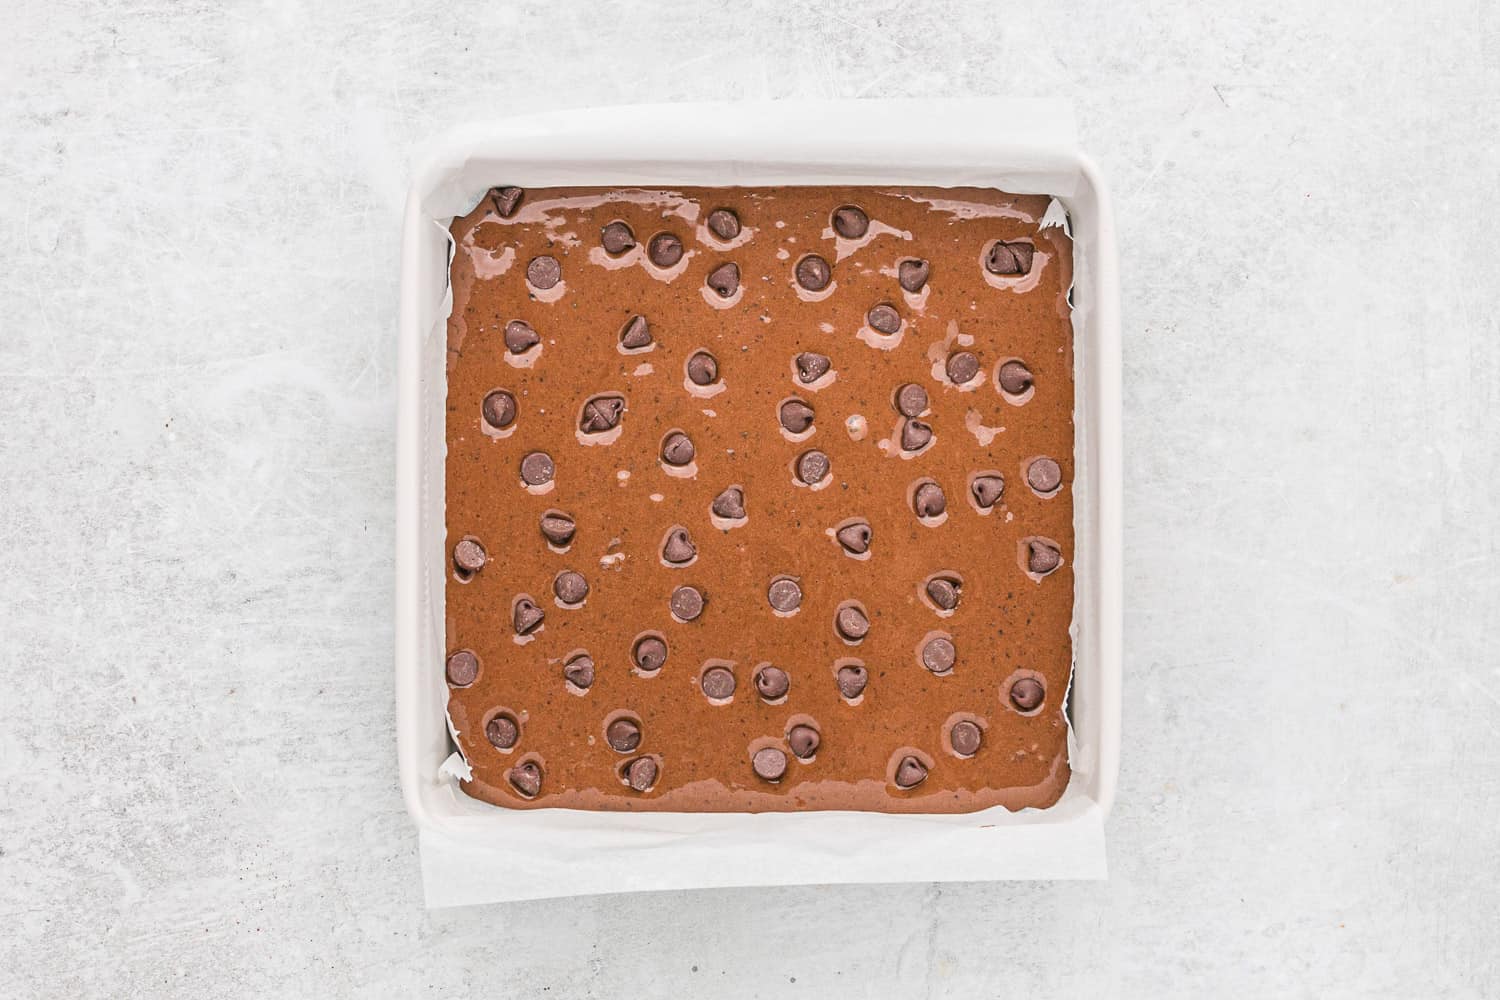 Chocolate chips sprinkled onto unbaked brownies.